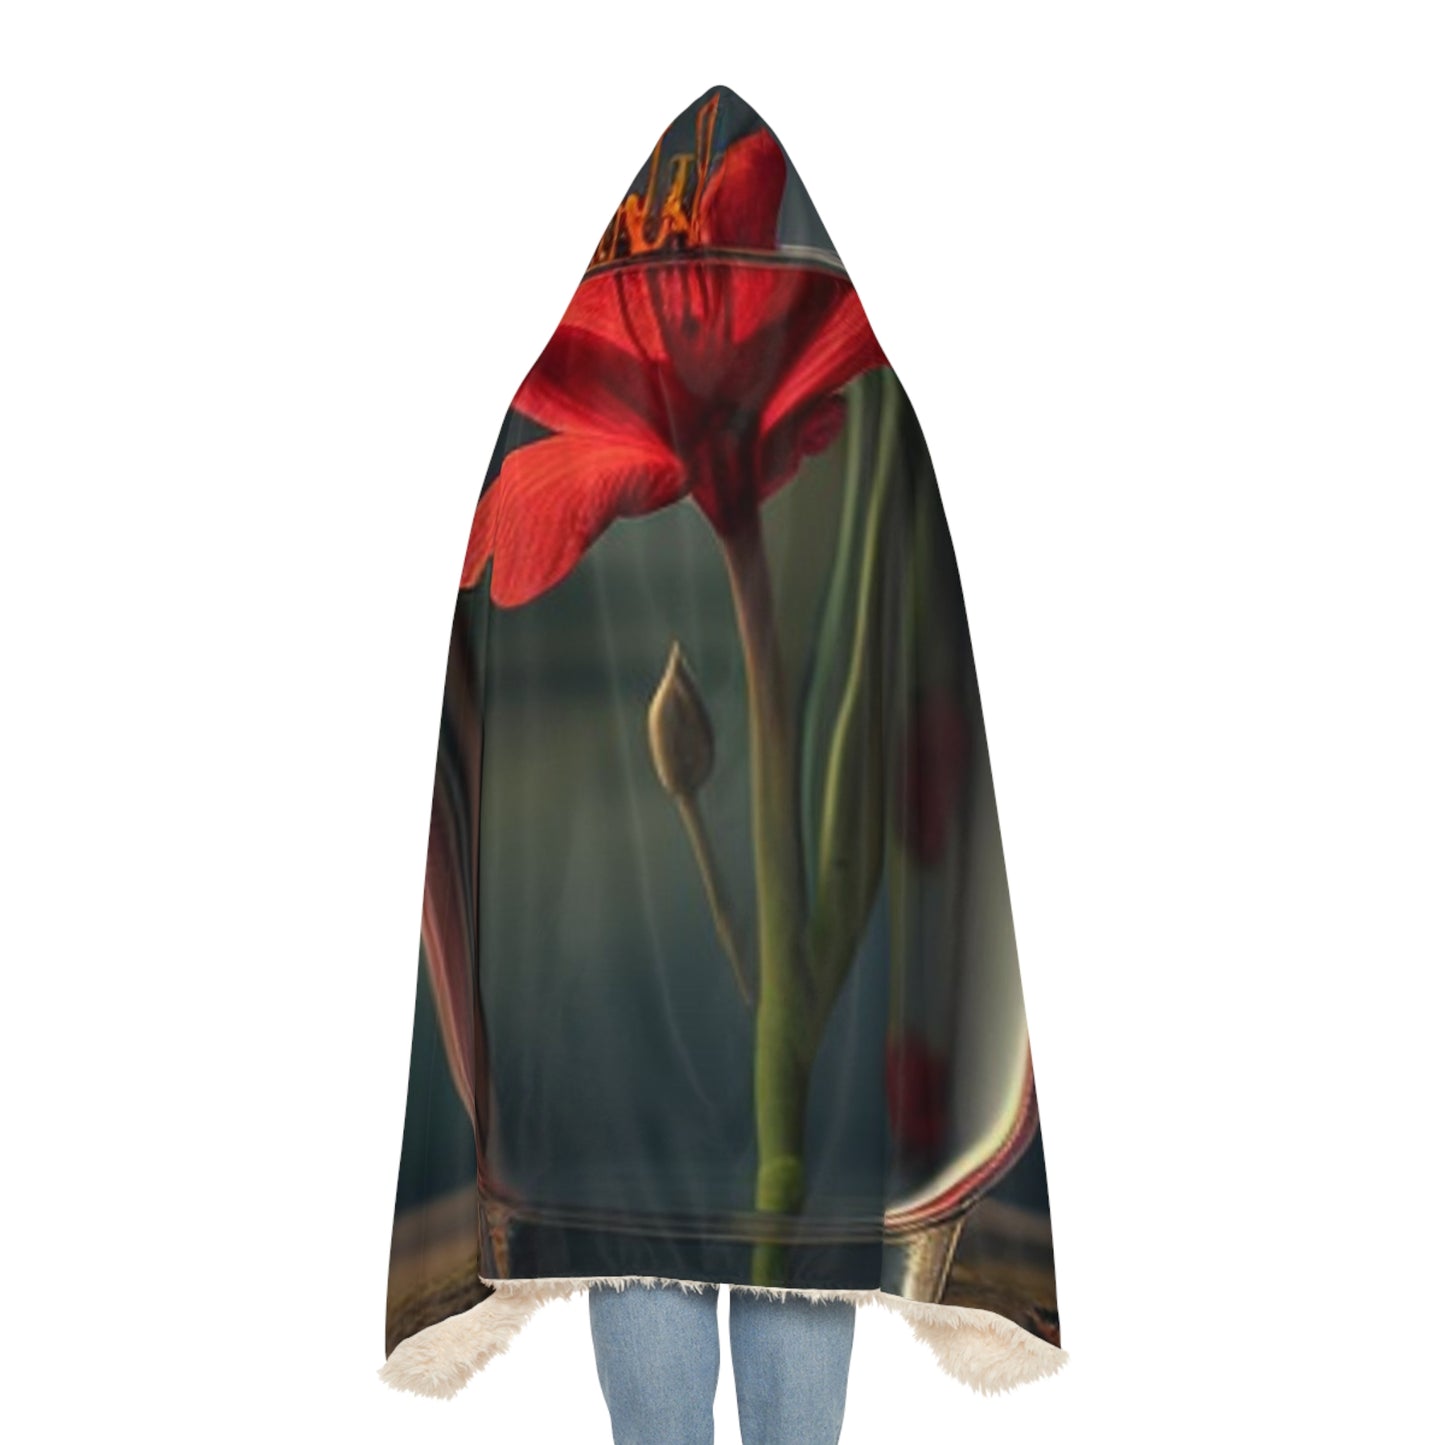 Snuggle Hooded Blanket Red Lily in a Glass vase 1